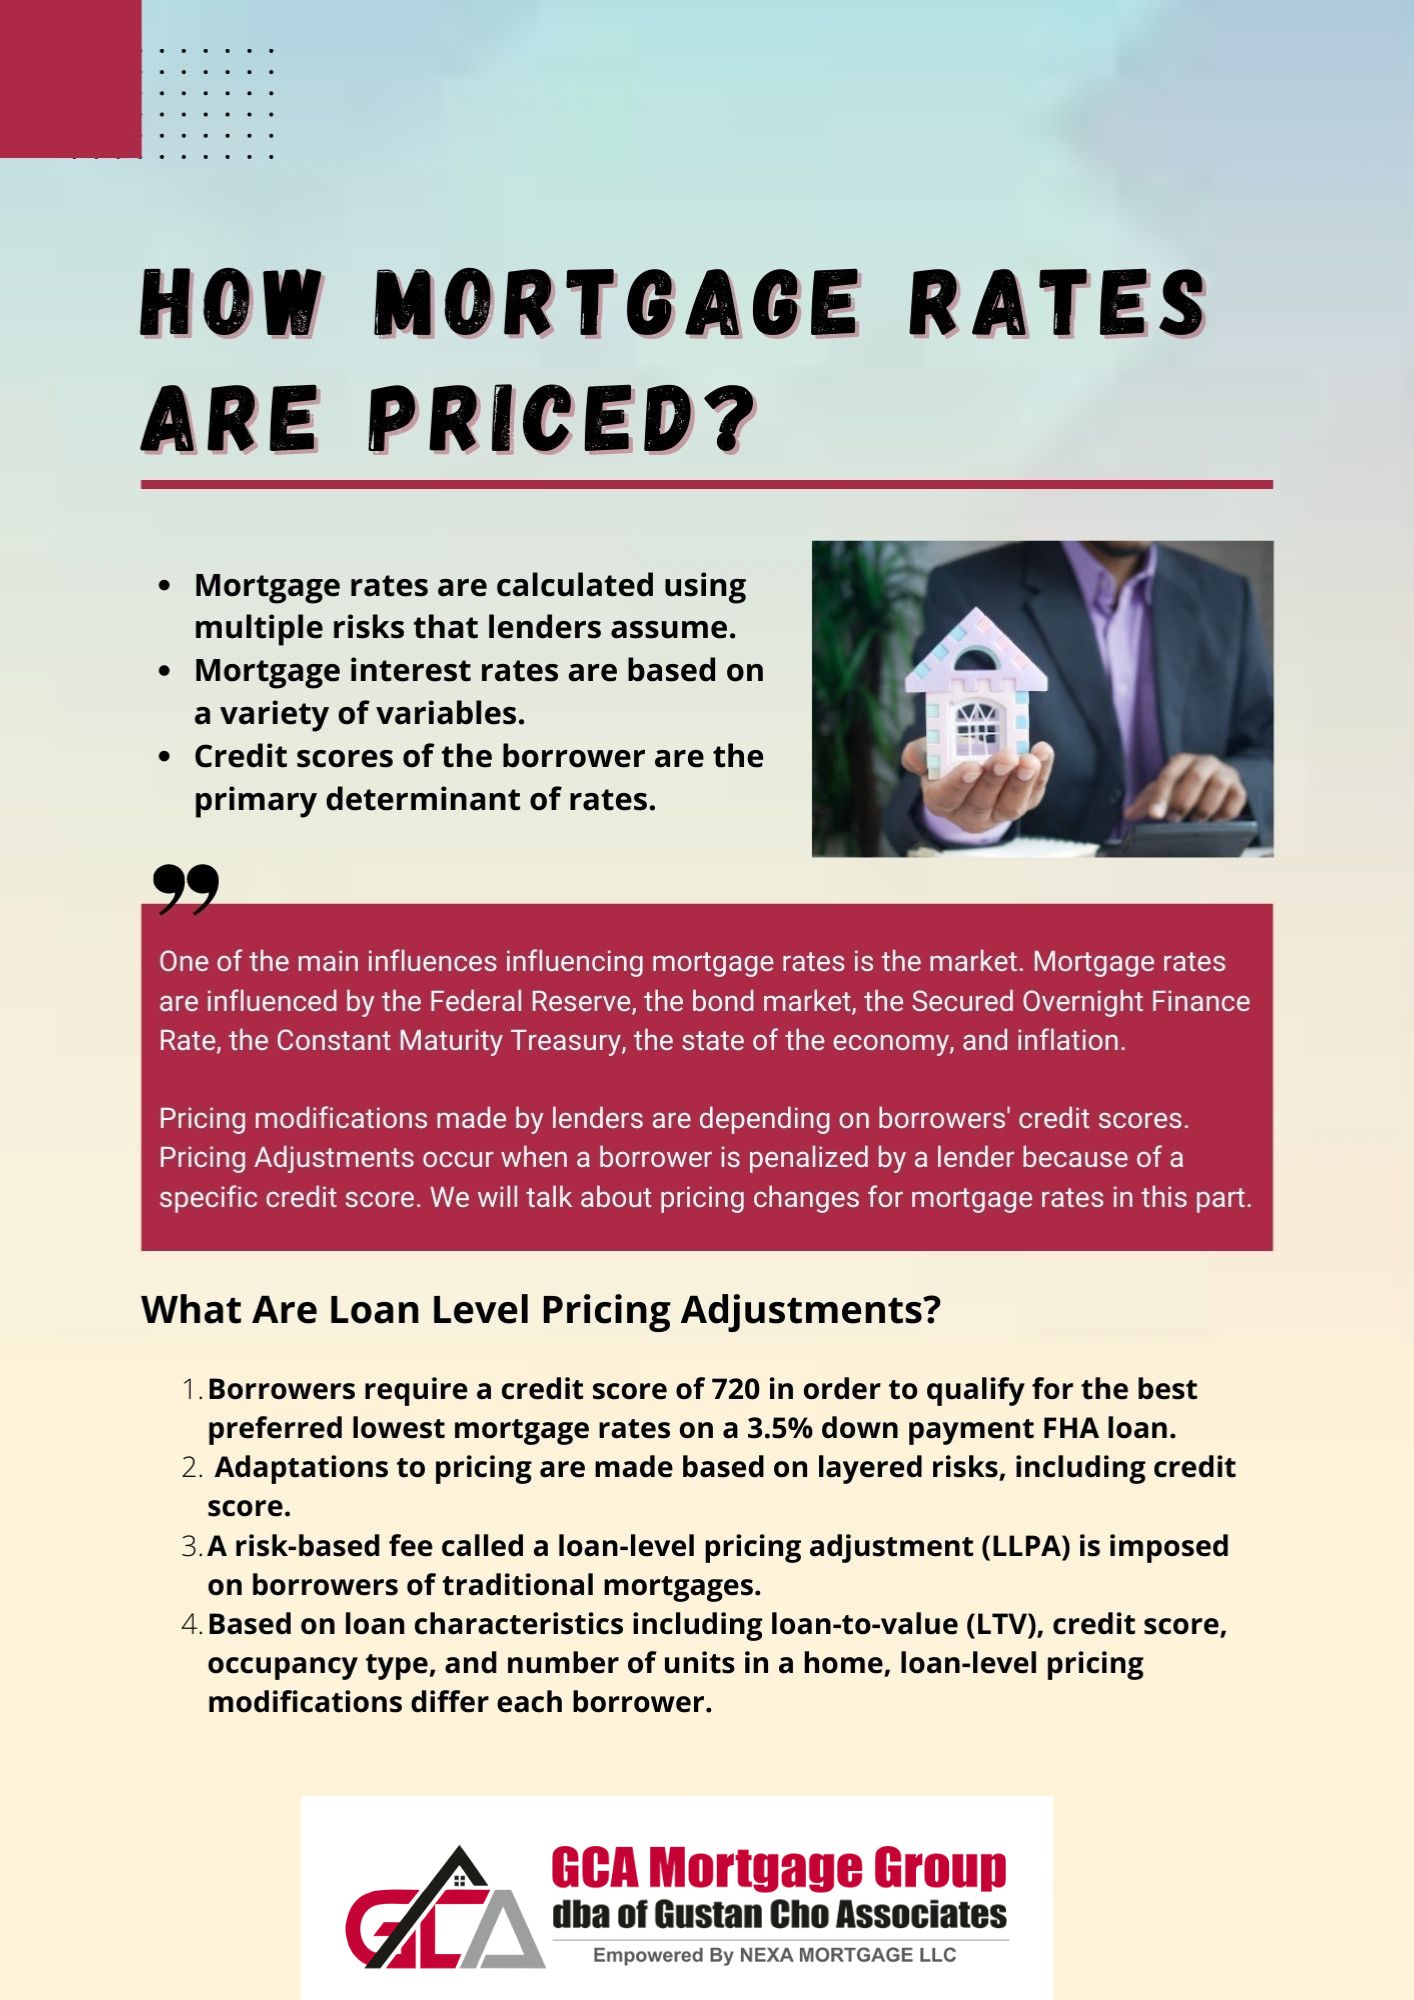 How Mortgage Rates Are Priced